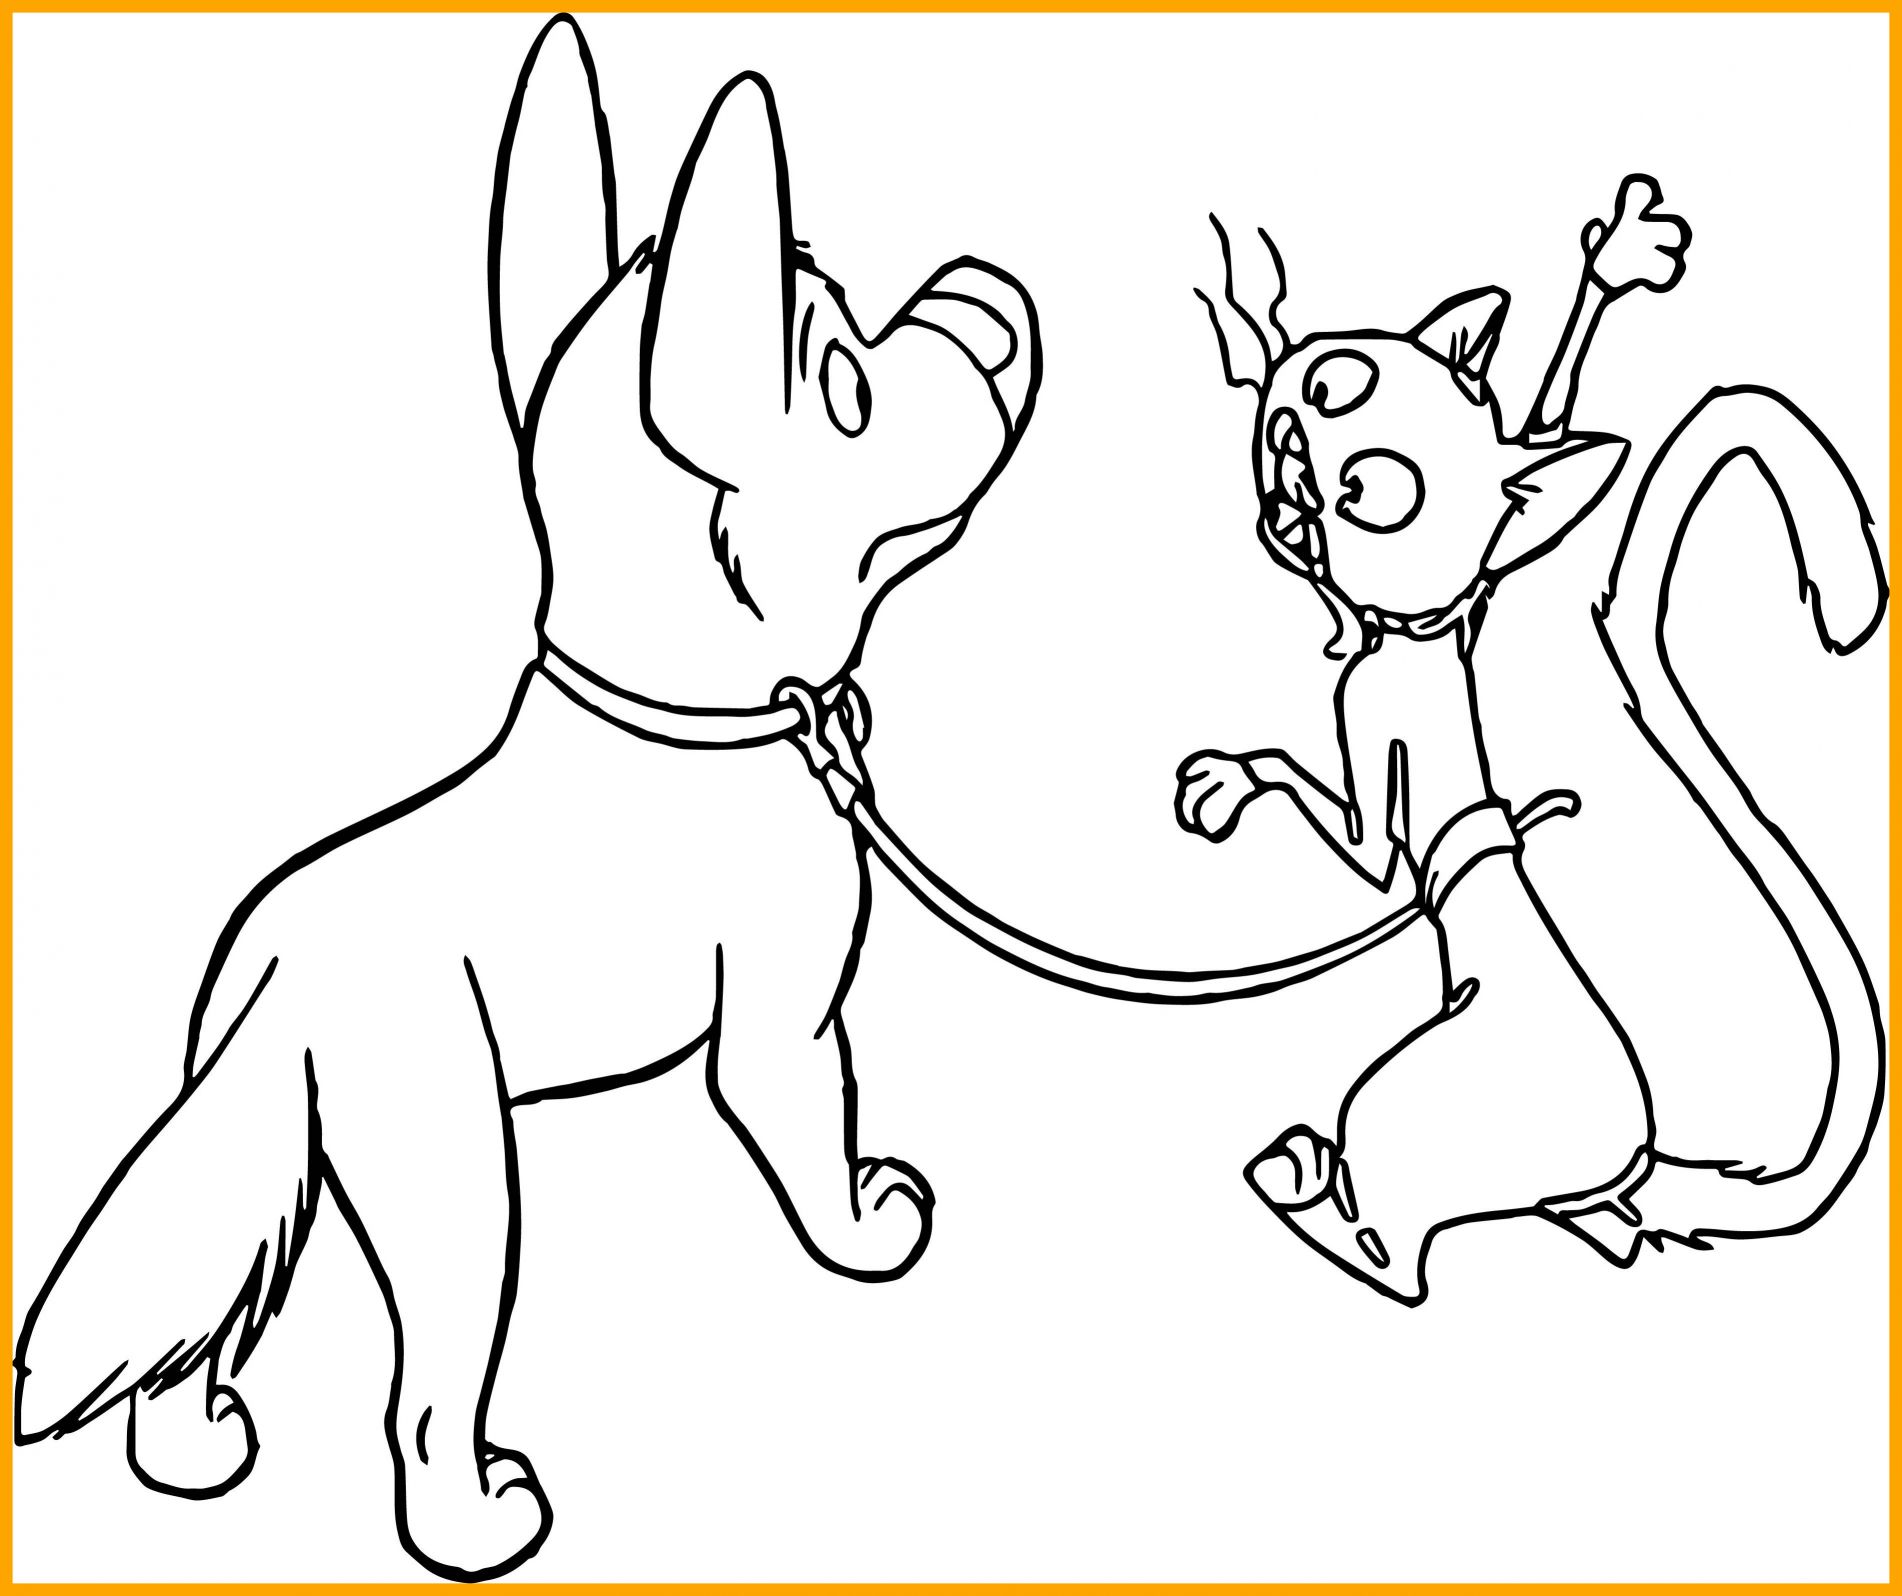 Dog And Cat Coloring Pages Printable at GetColorings.com | Free